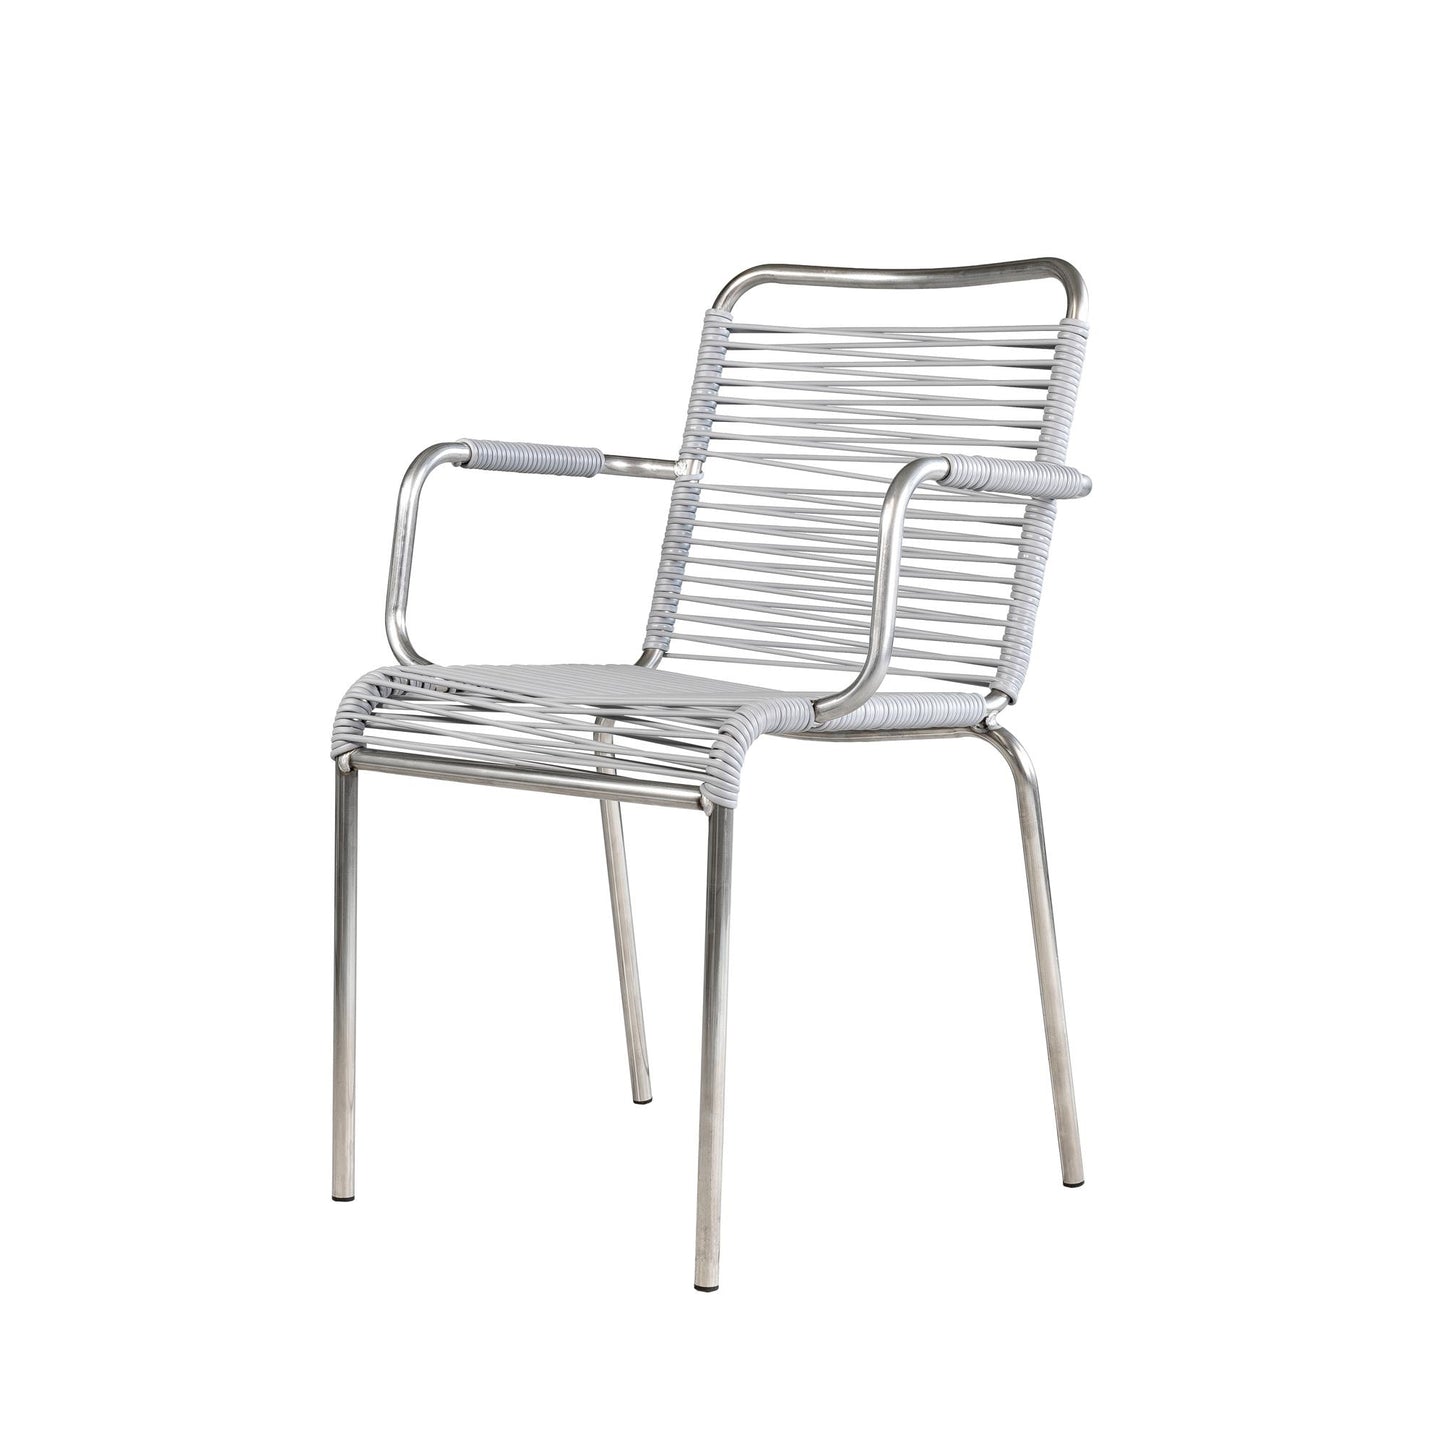 Mya Spaghetti Dining Chair with Armrests by Fiam #Gray